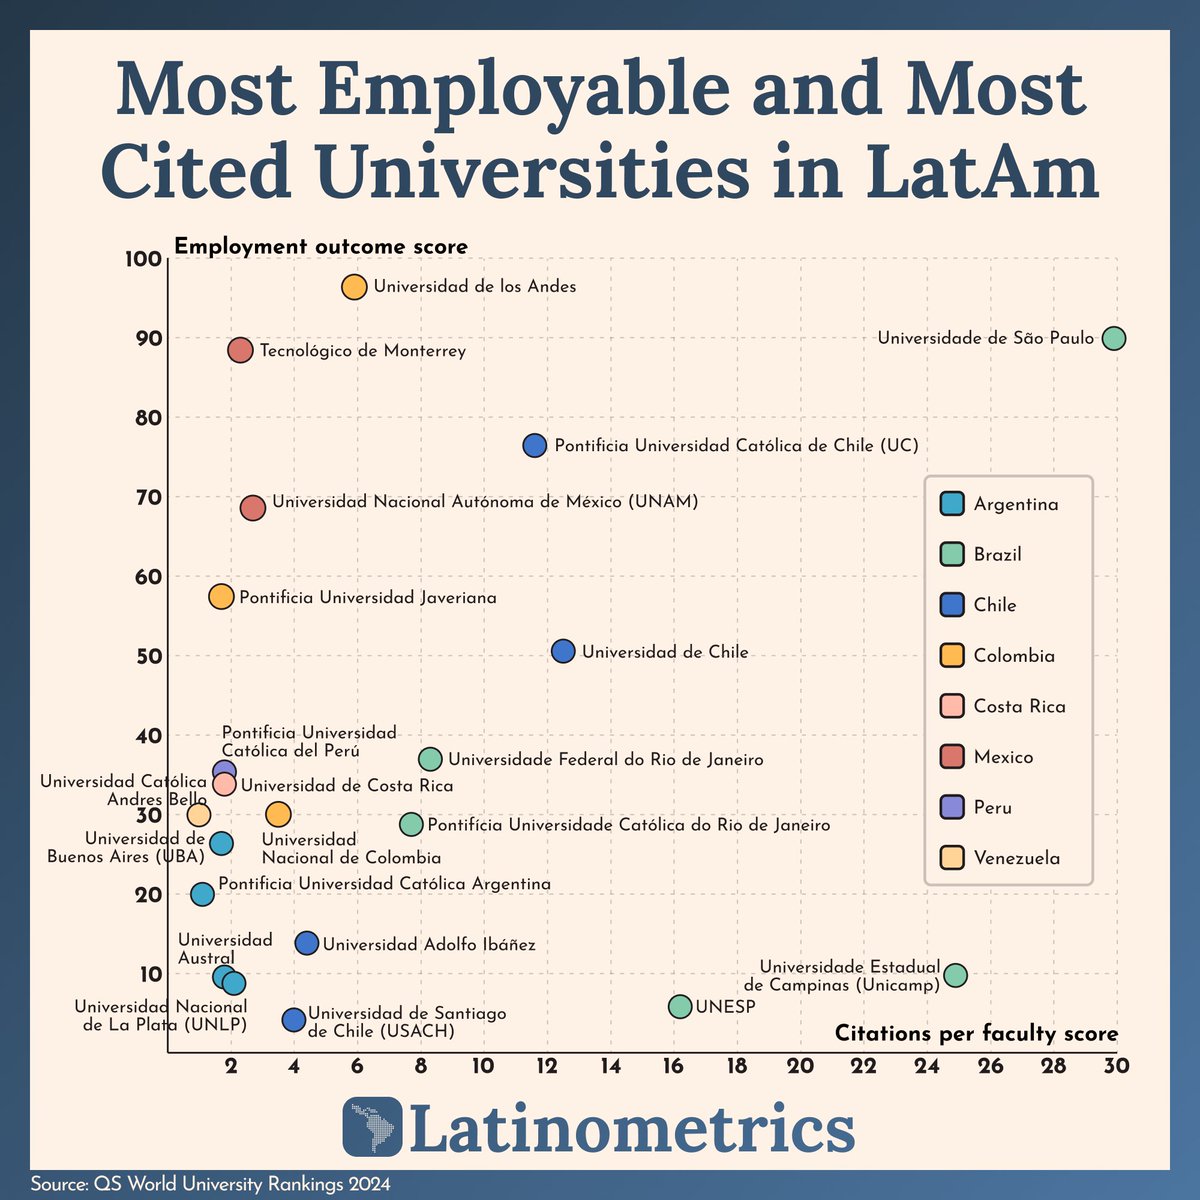 📖Which Latin American universities are most cited by academics worldwide? let’s find out ↓